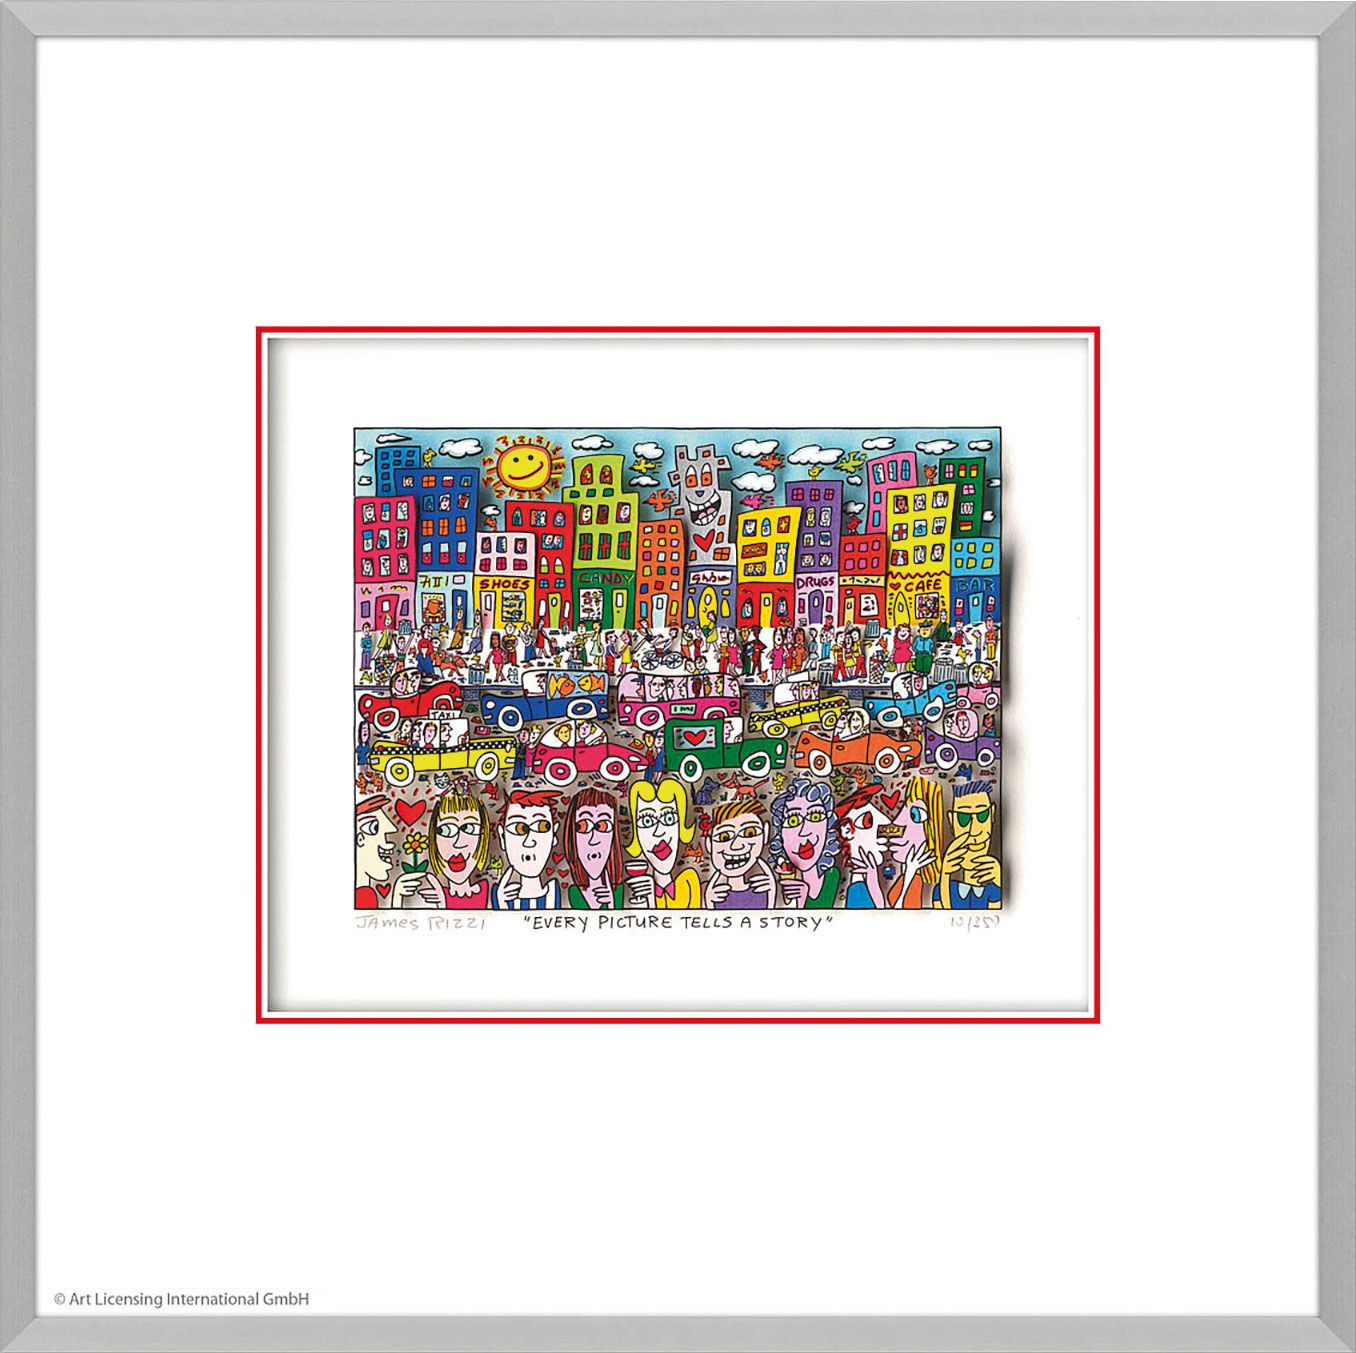 3D Picture "Every Picture Tells a Story", framed by James Rizzi